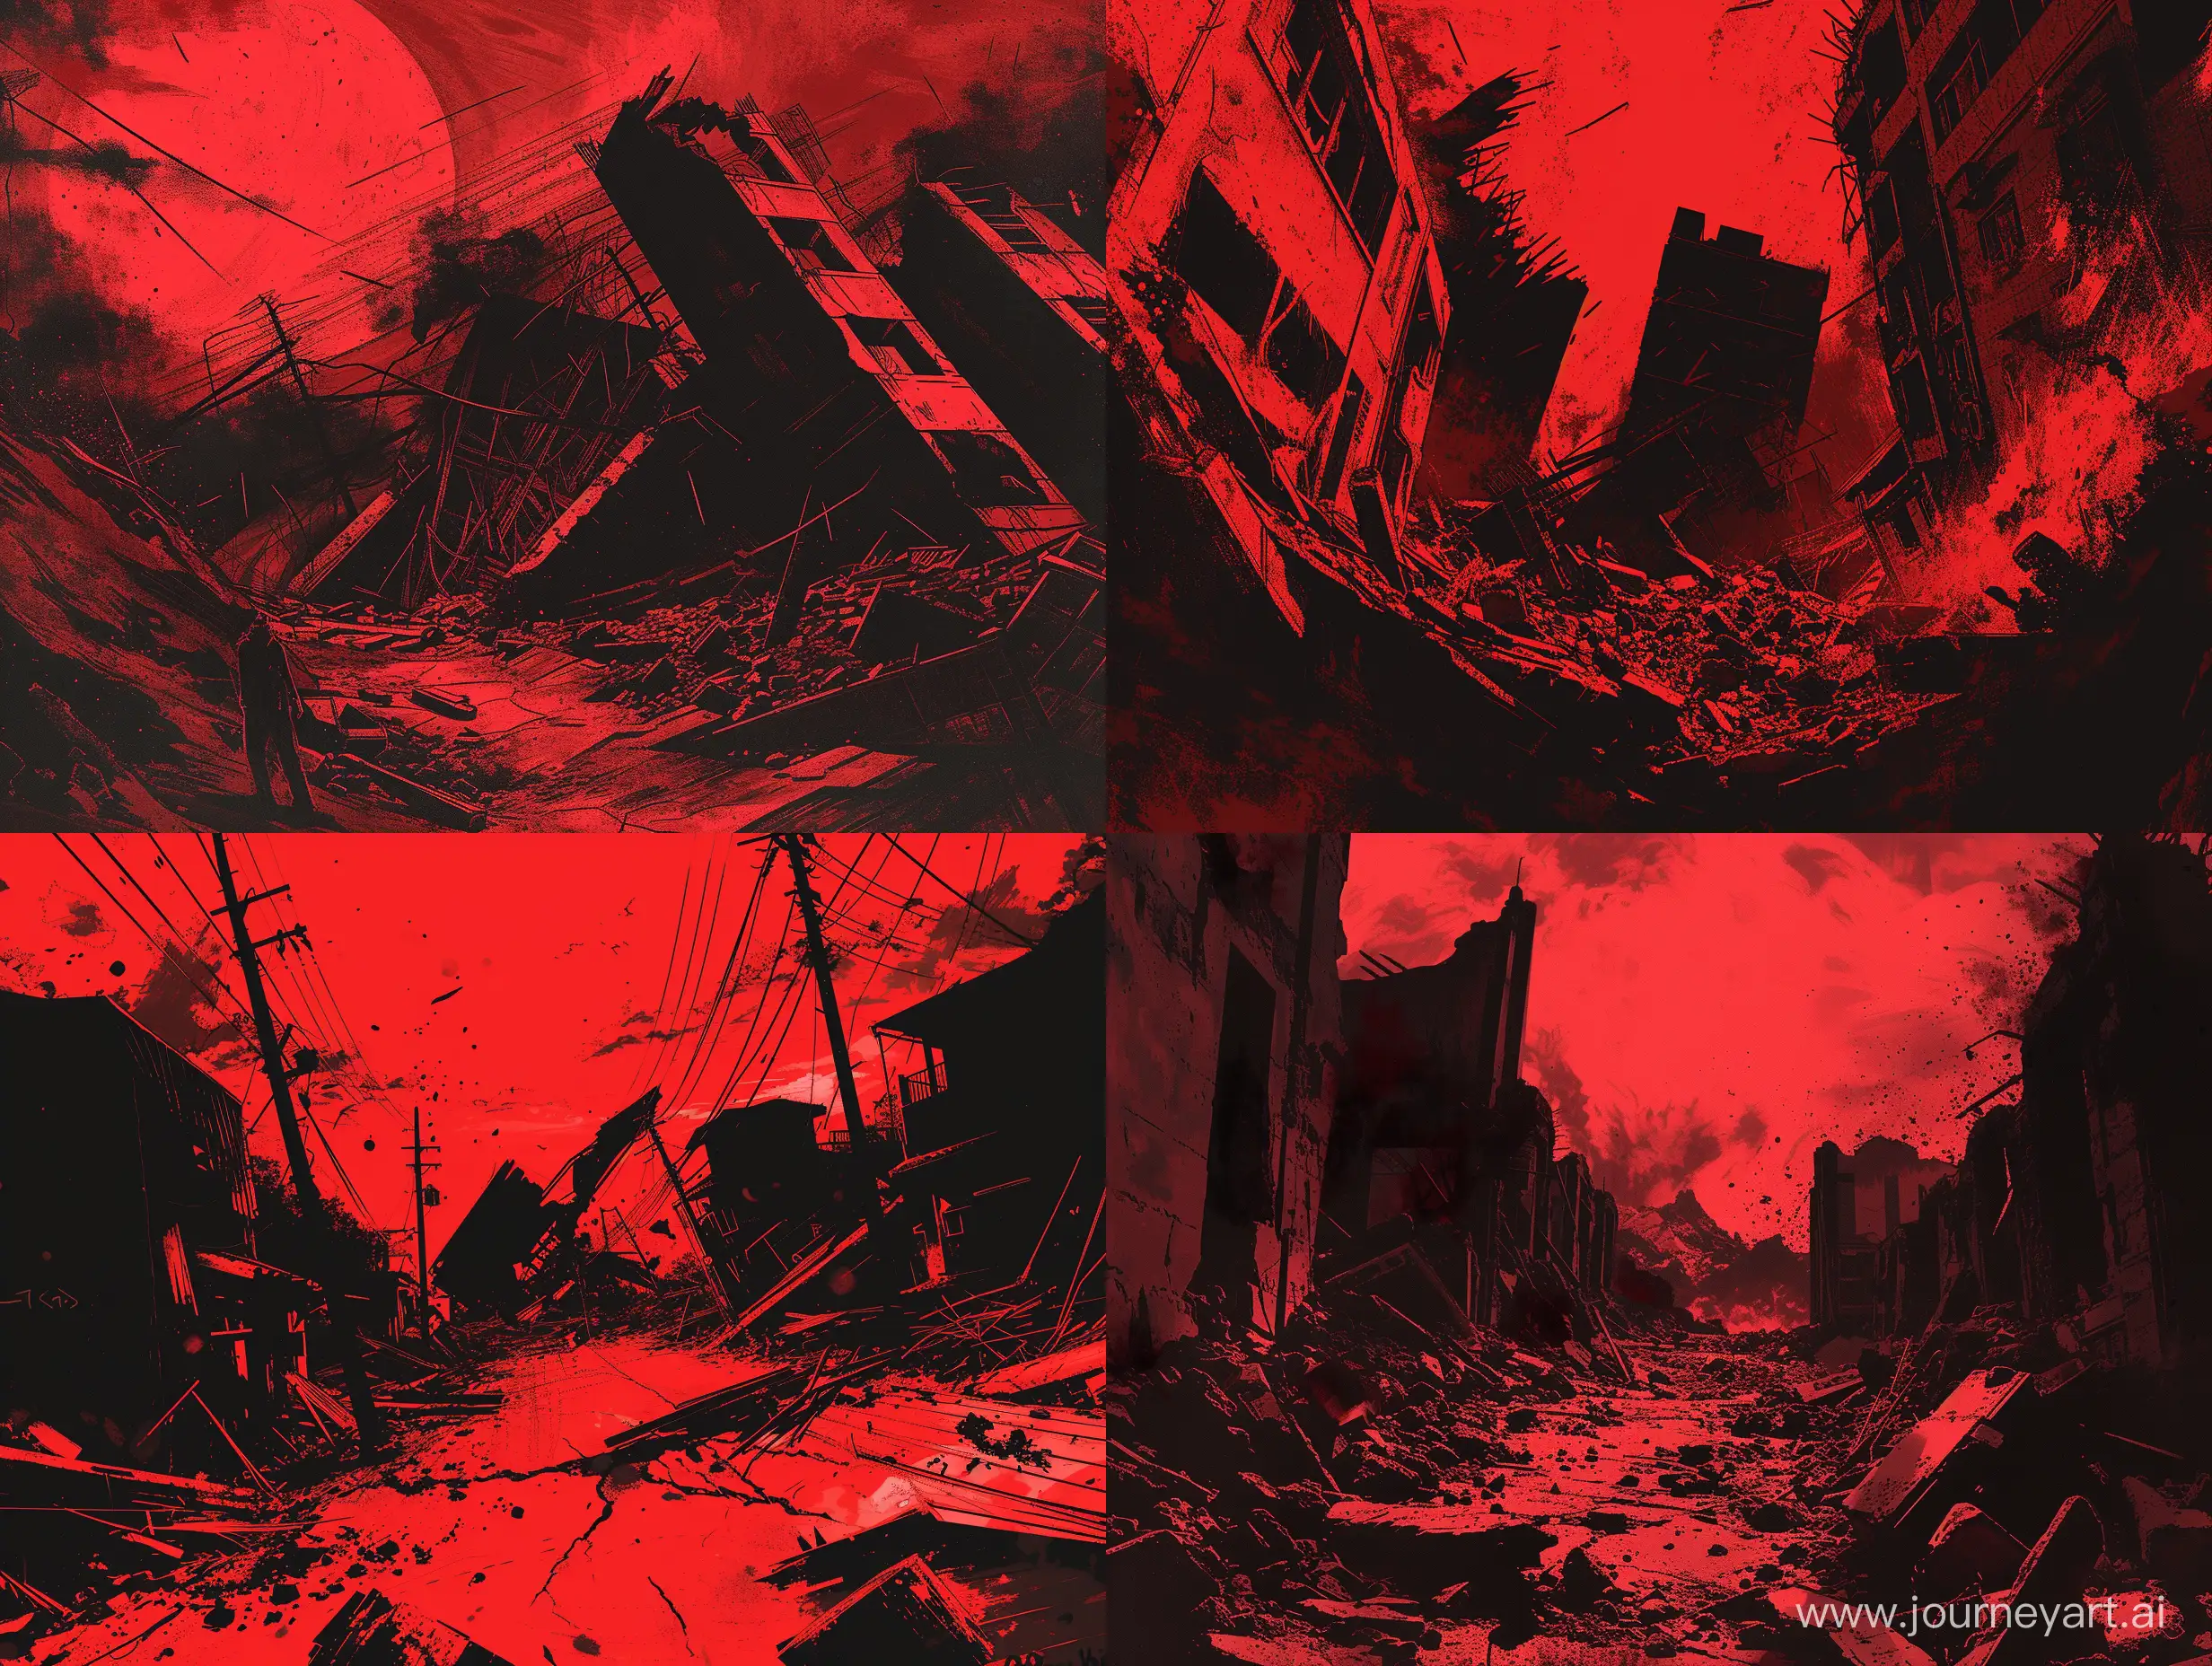 On the anniversary of the earthquake where thousands lost their lives, design a commemorative post. The post should be in red and black tones and evoke a somber atmosphere. Visually, use a striking image representing destruction and loss. Create a composition that stirs emotions, expressing pain and loss. Communicate a strong emotion through colors and visuals, without using text or tags.